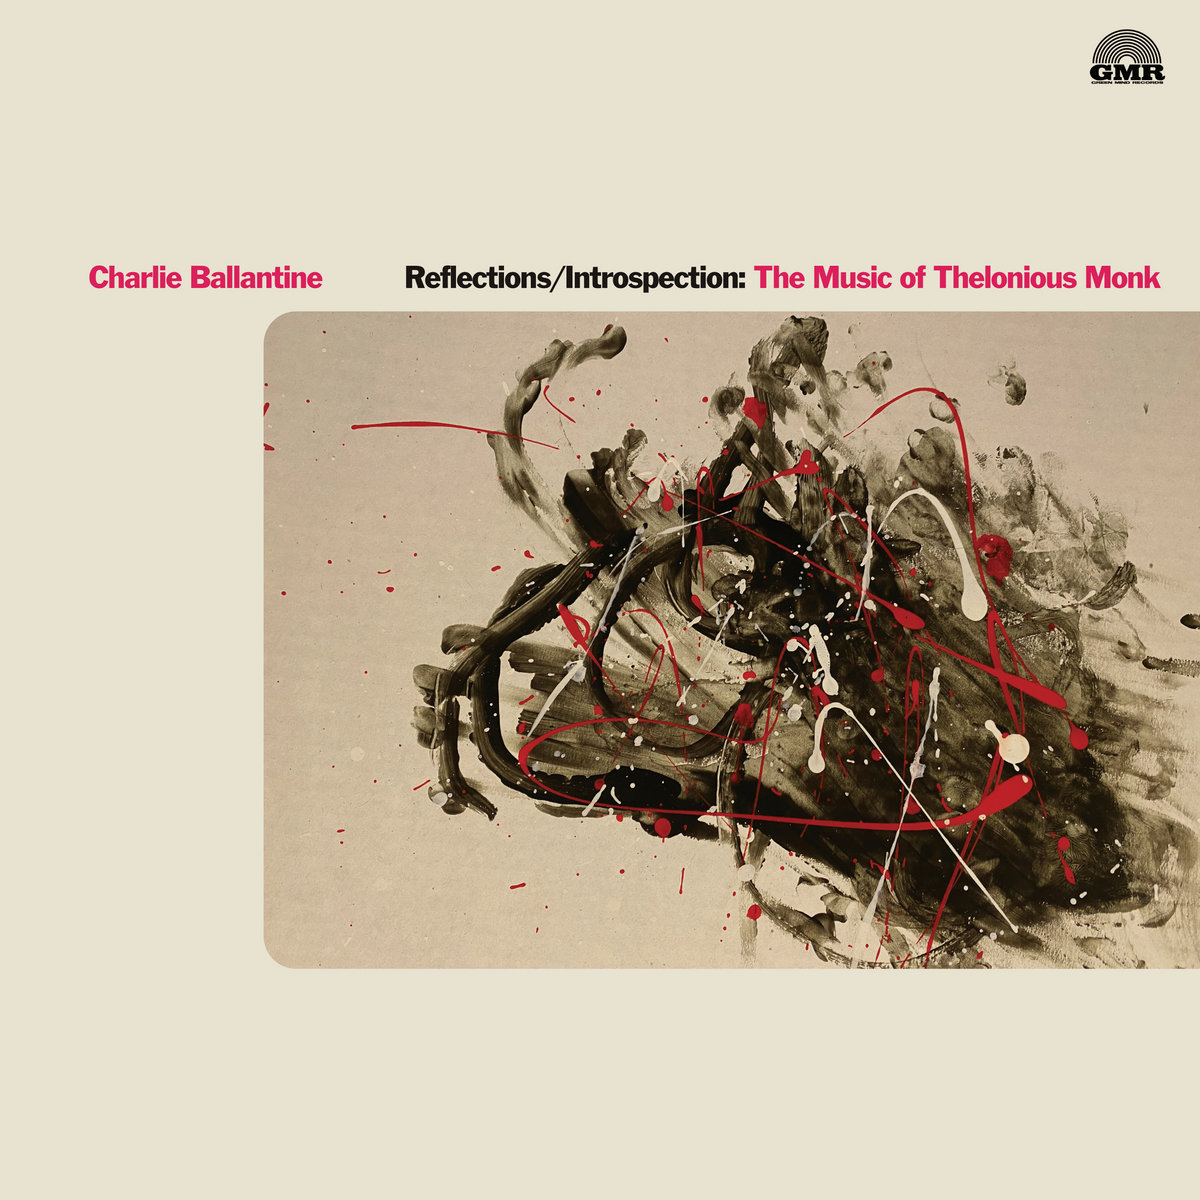 Reflections/Introspection: The Music of Thelonious Monk | Charlie Ballantine